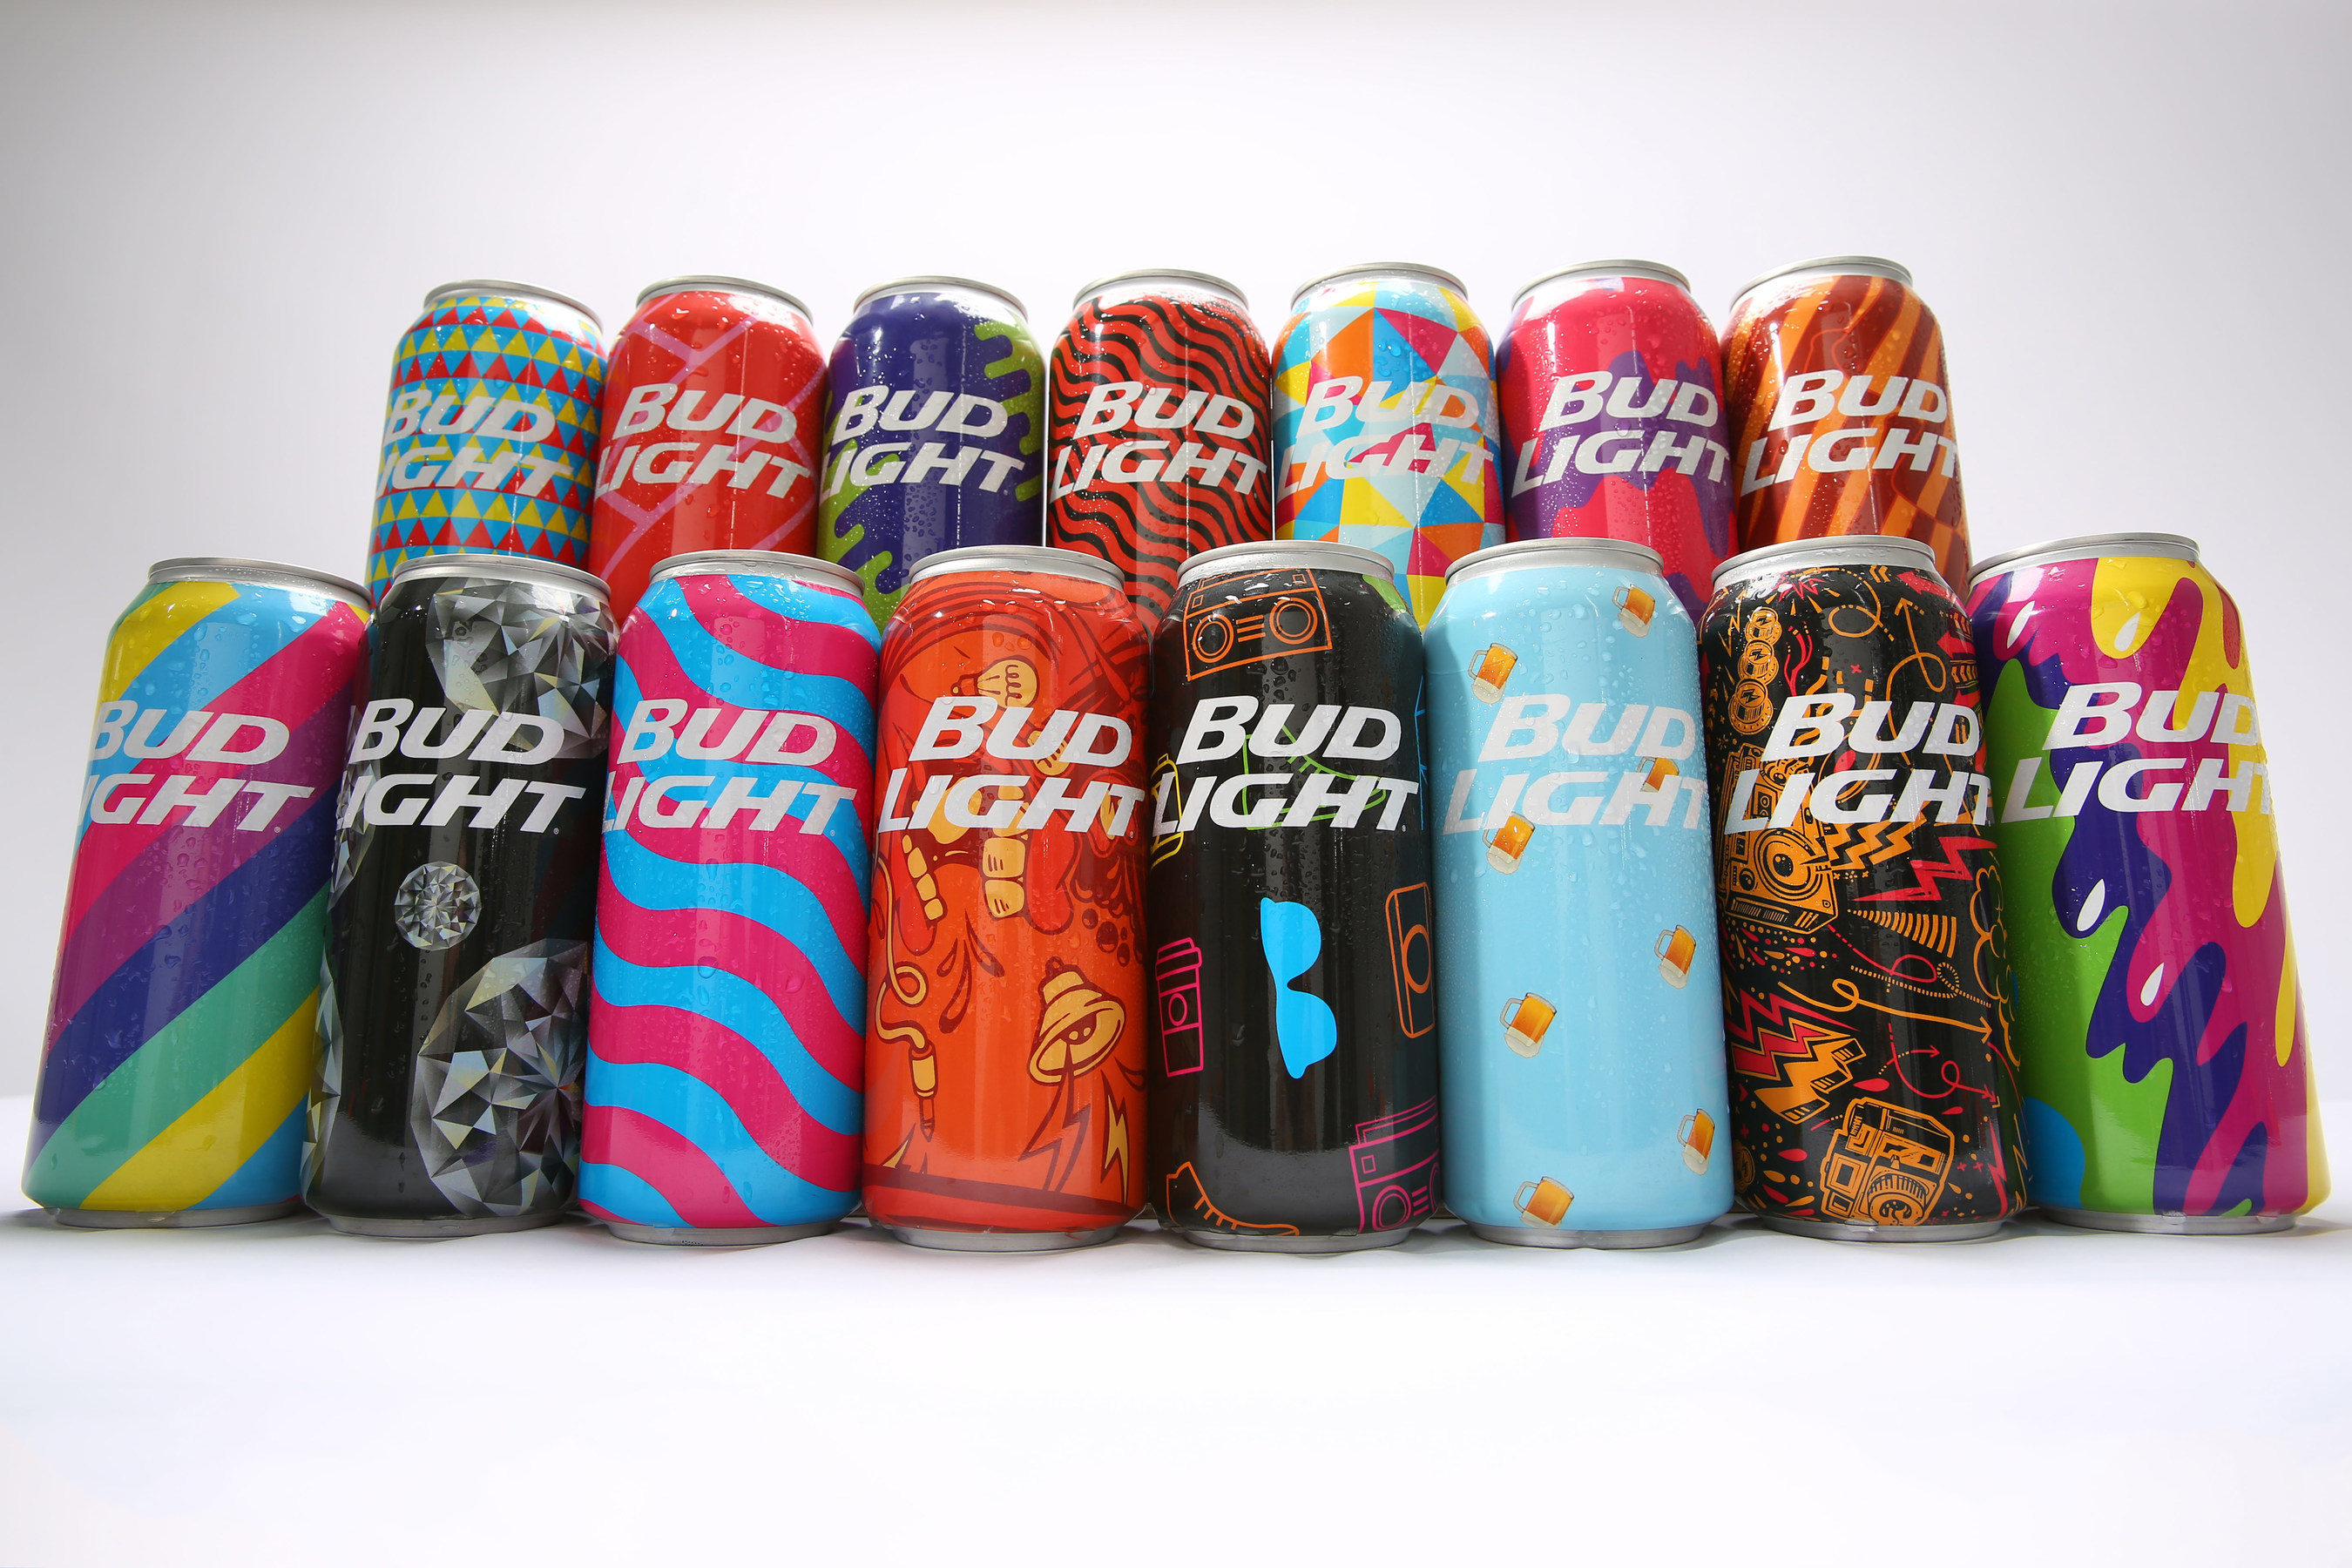 Bud Light is bringing what's sure to be summer's most sought-after beer can to summer's hottest music festival: Diplo's Mad Decent Summer Block Party. These bright, graphic Bud Light Festival Cans are like nothing you've ever seen from Bud Light - or any brand in the U.S.